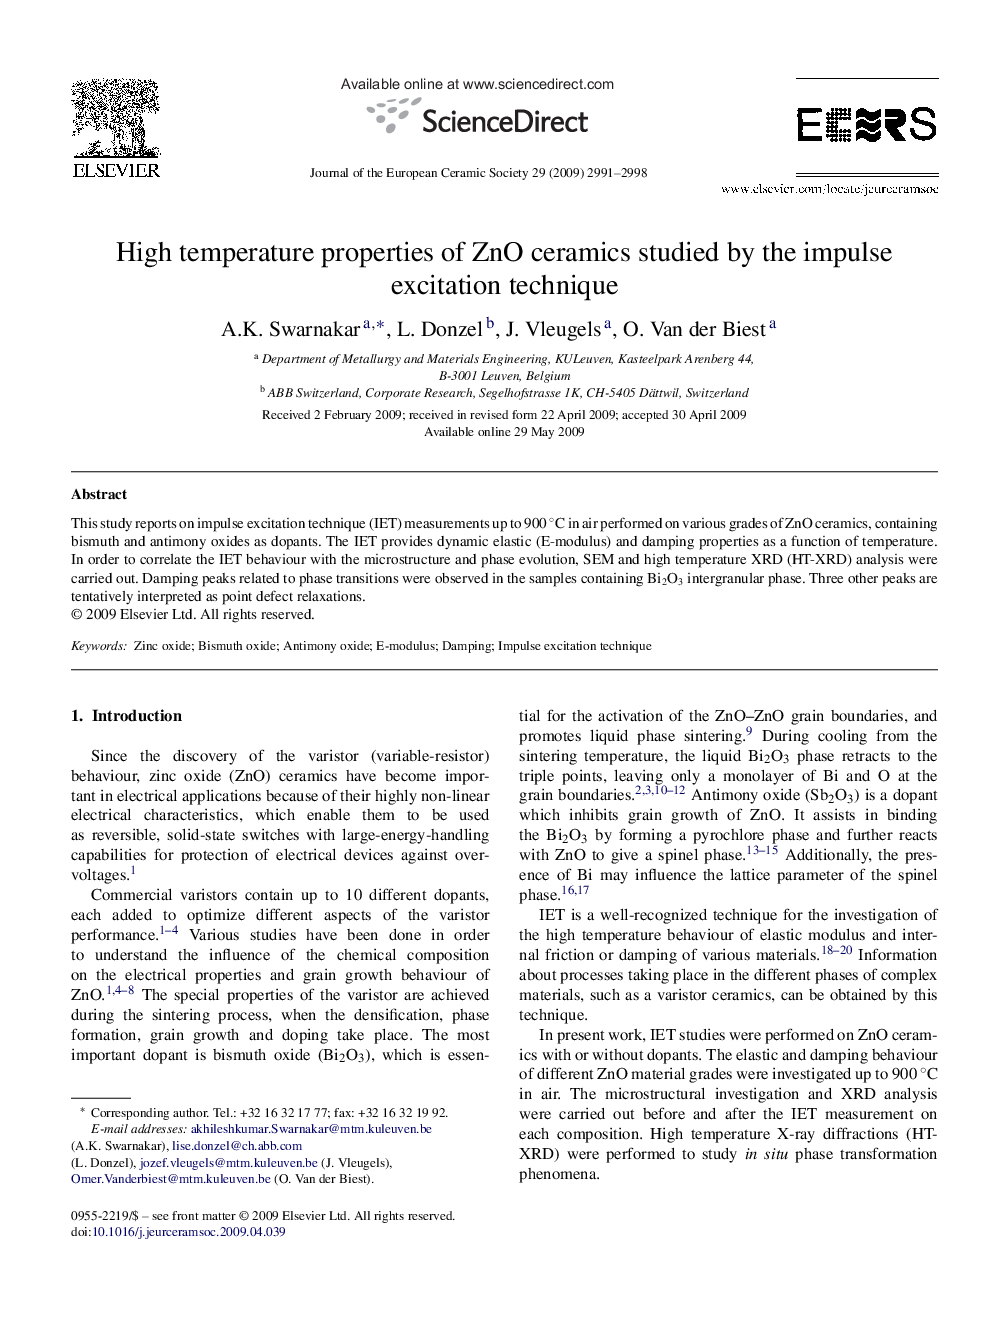 High temperature properties of ZnO ceramics studied by the impulse excitation technique